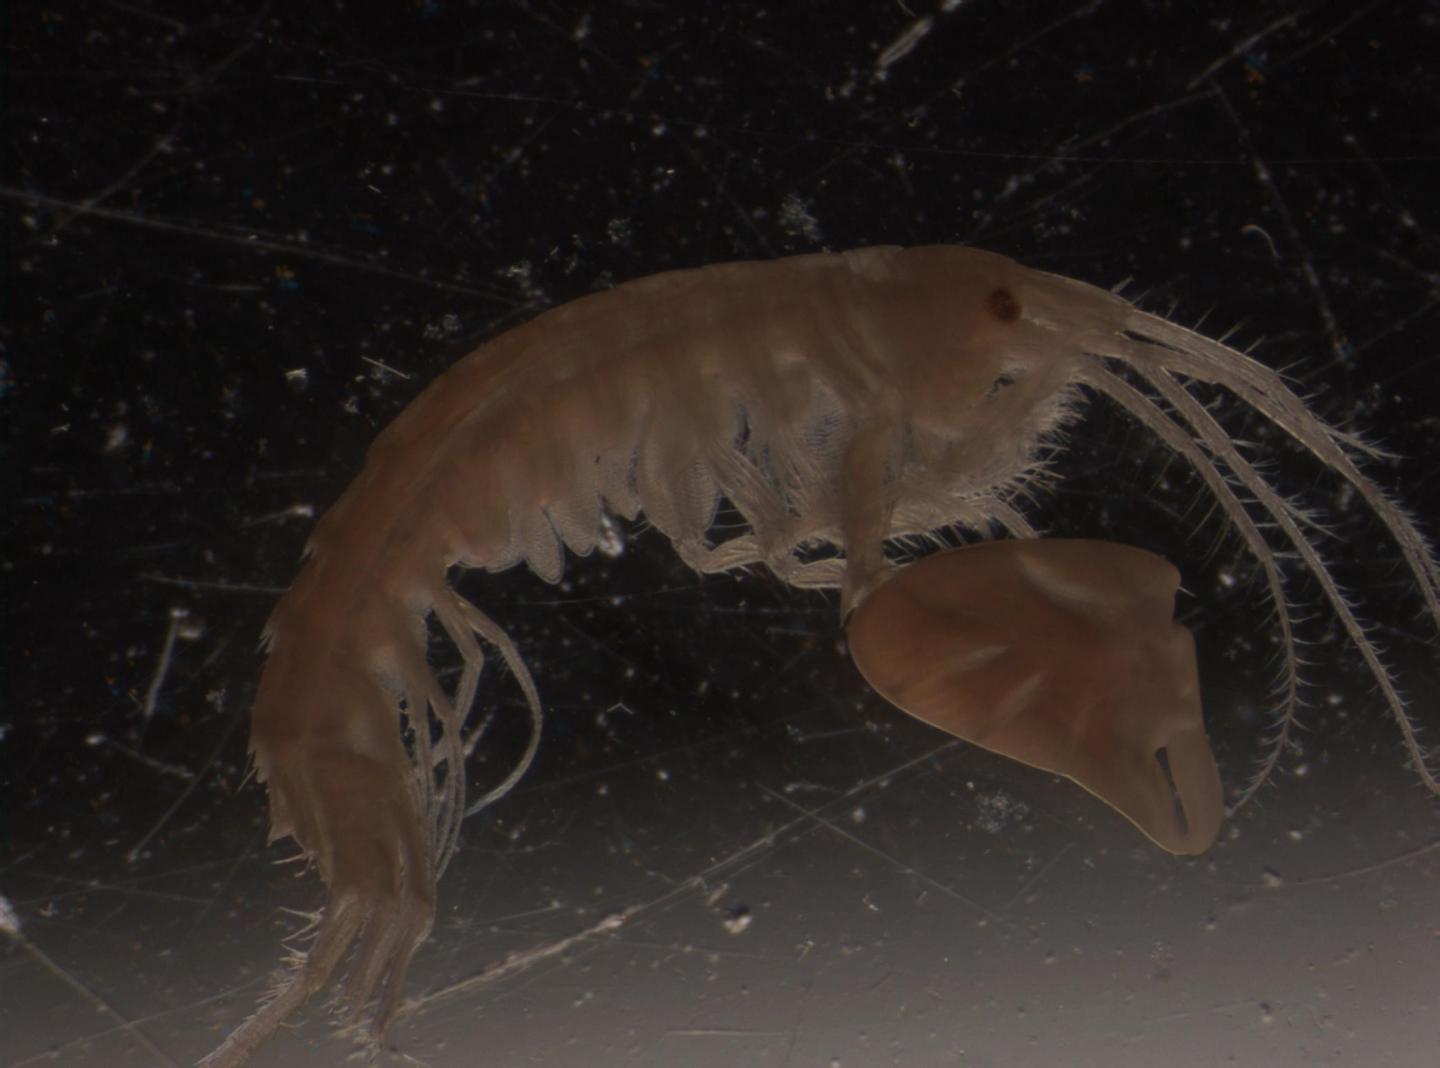 Right-Clawed Amphipod Attracts the Girls